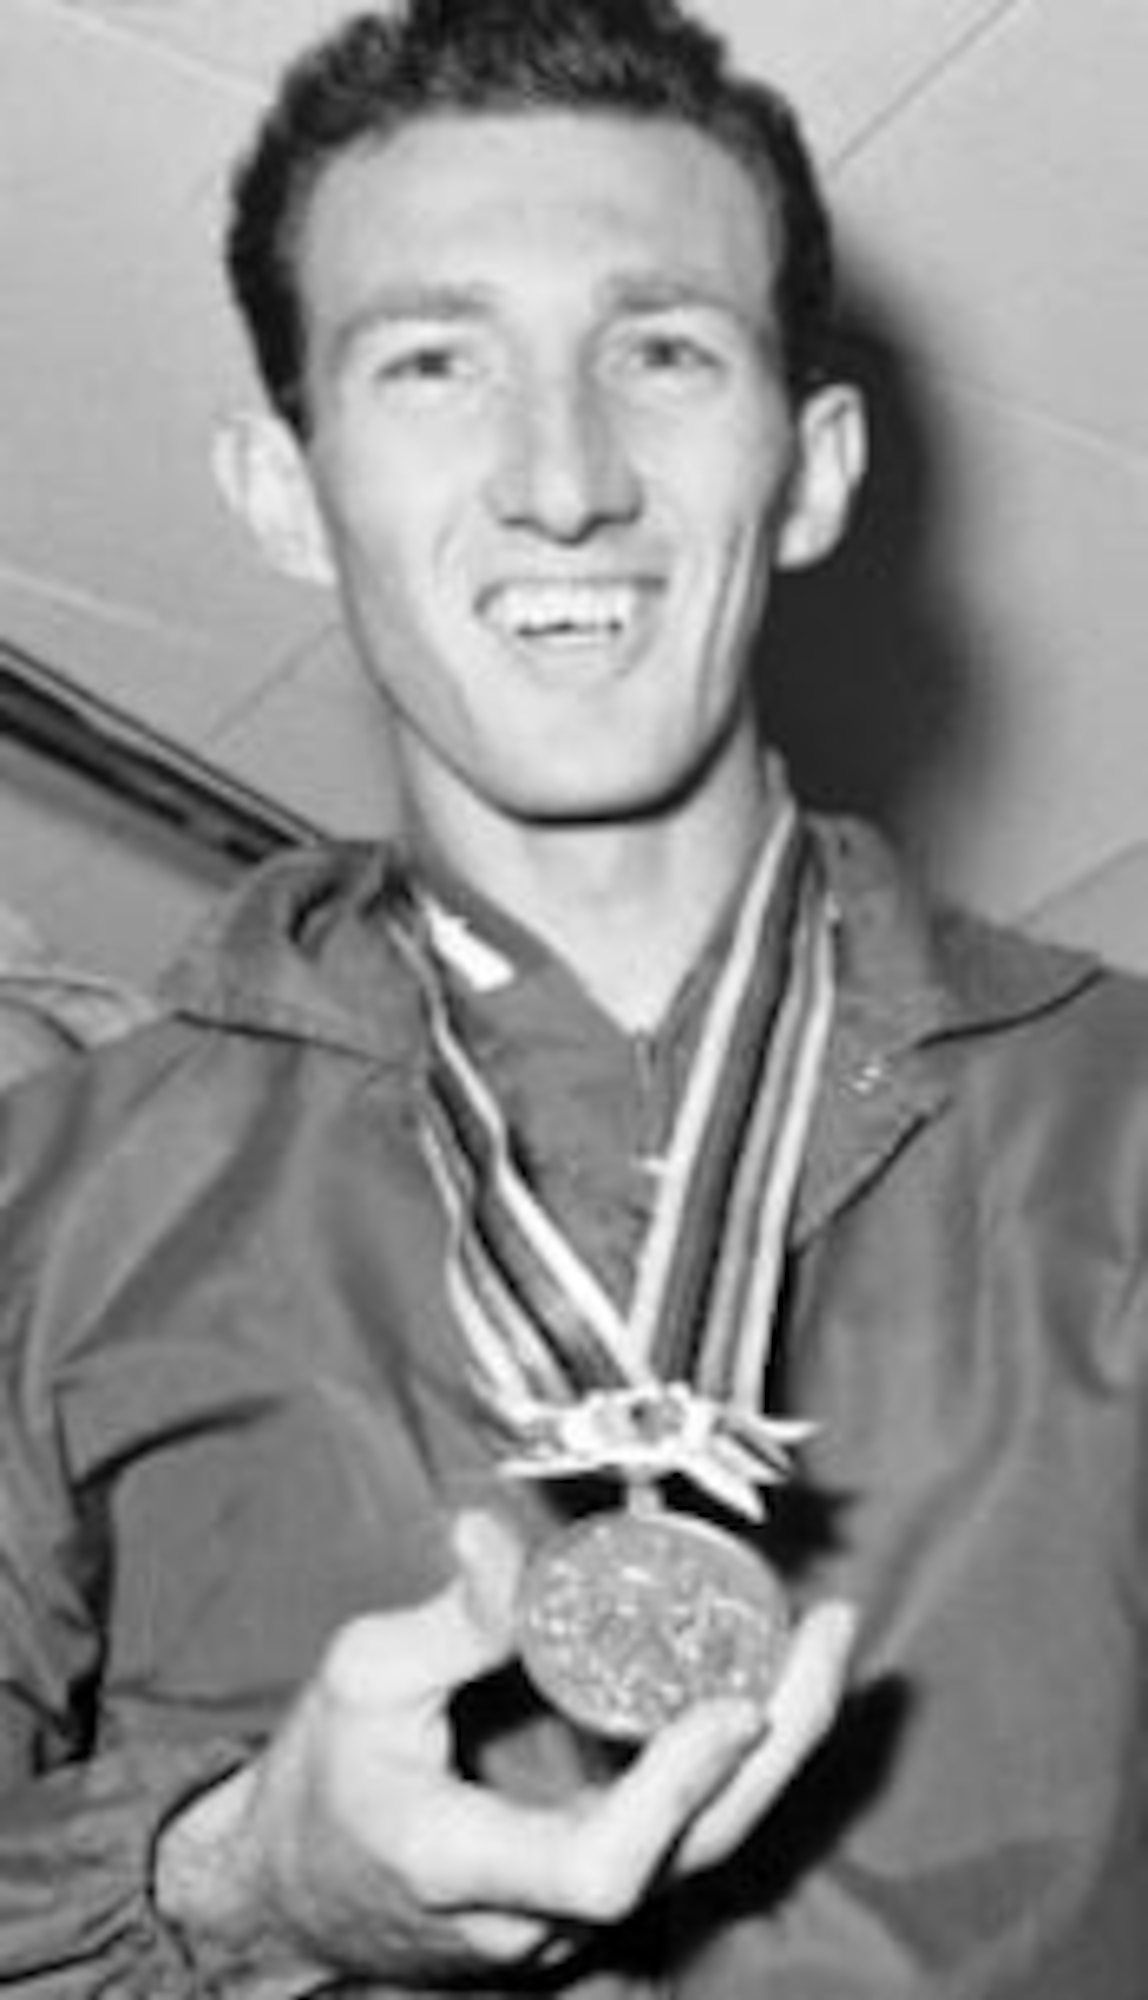 Along with American Paralympic Gold medalist Grace Norman, veteran and American Gold Medalist Bob Schul is scheduled to be the second guest speaker for the 23rd Air Force Marathon. Schul is the first and only Team USA runner to win the 5,000 meters at the Olympic games. (Contributed photo)